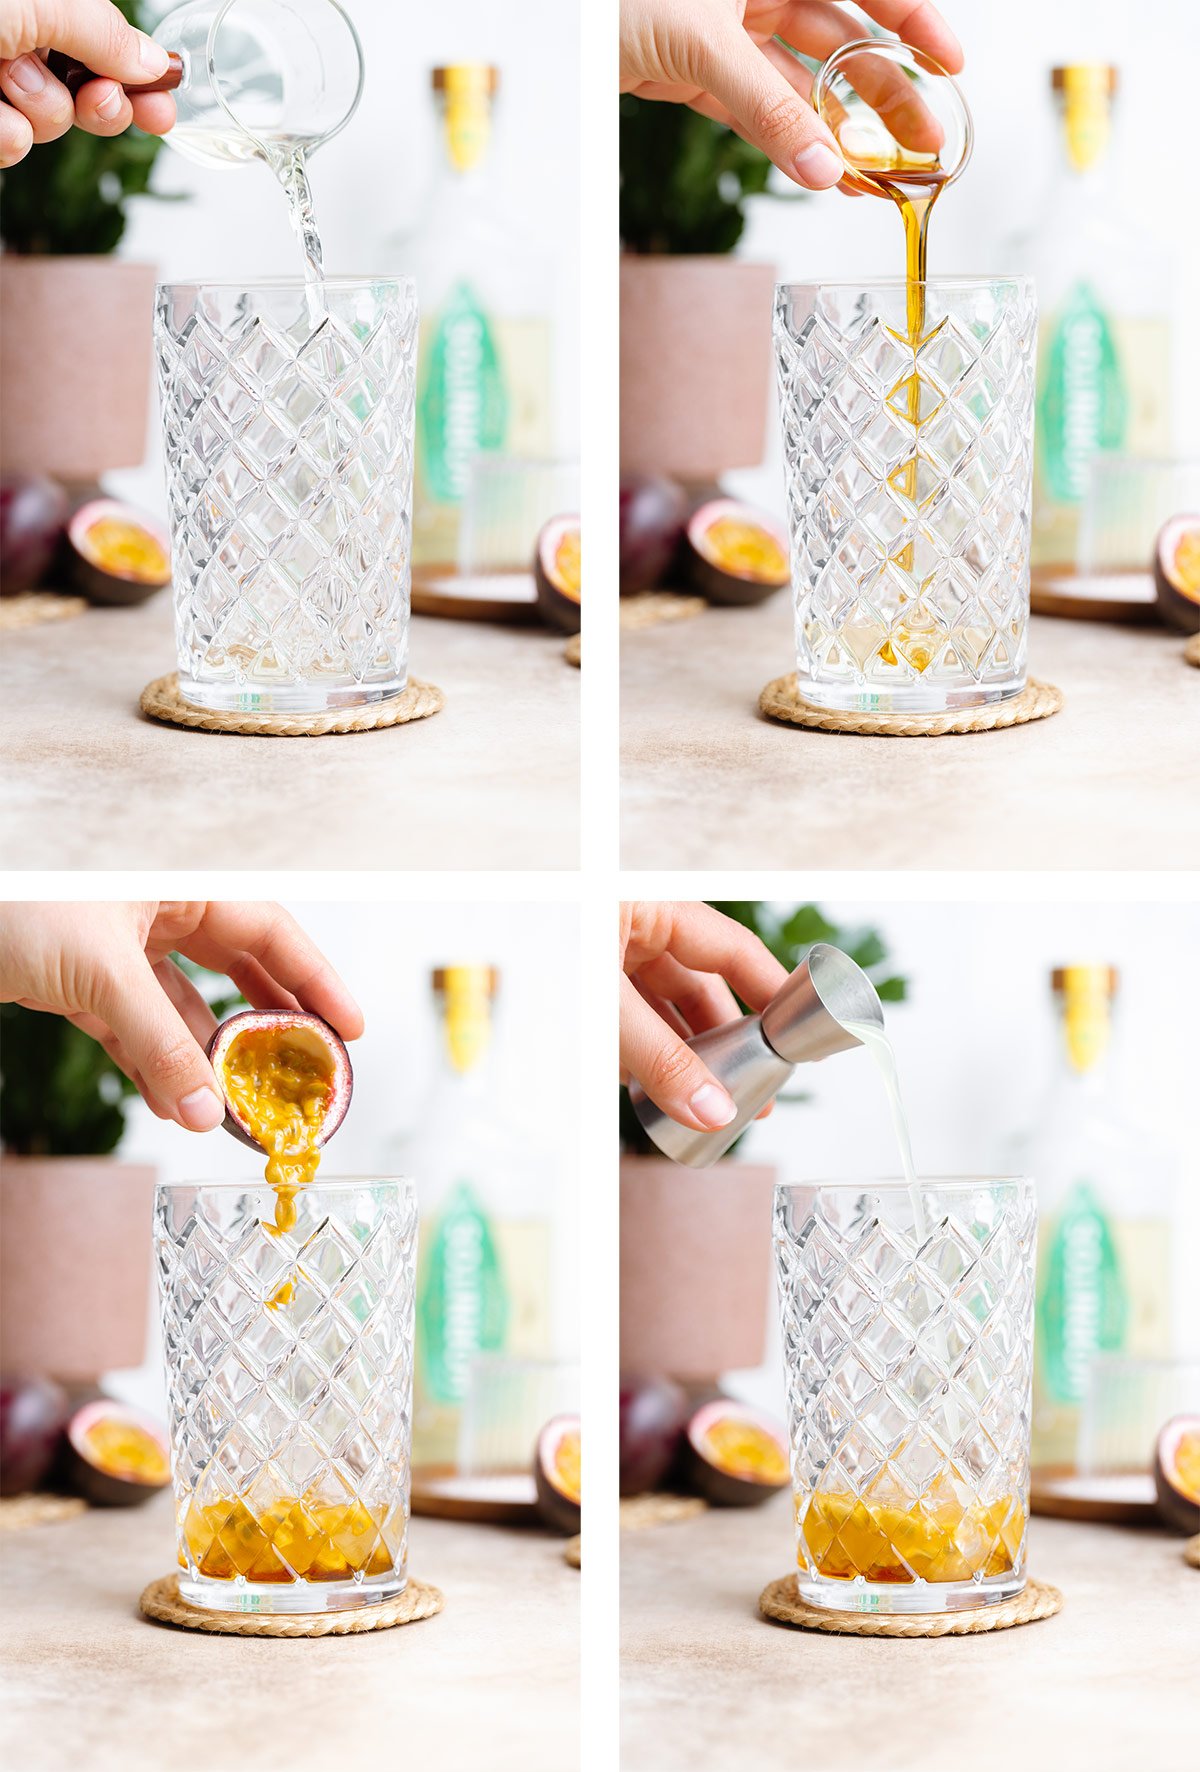 Tequila, maple syrup, passion fruit, and lime juice being poured into a glass cocktail shaker.